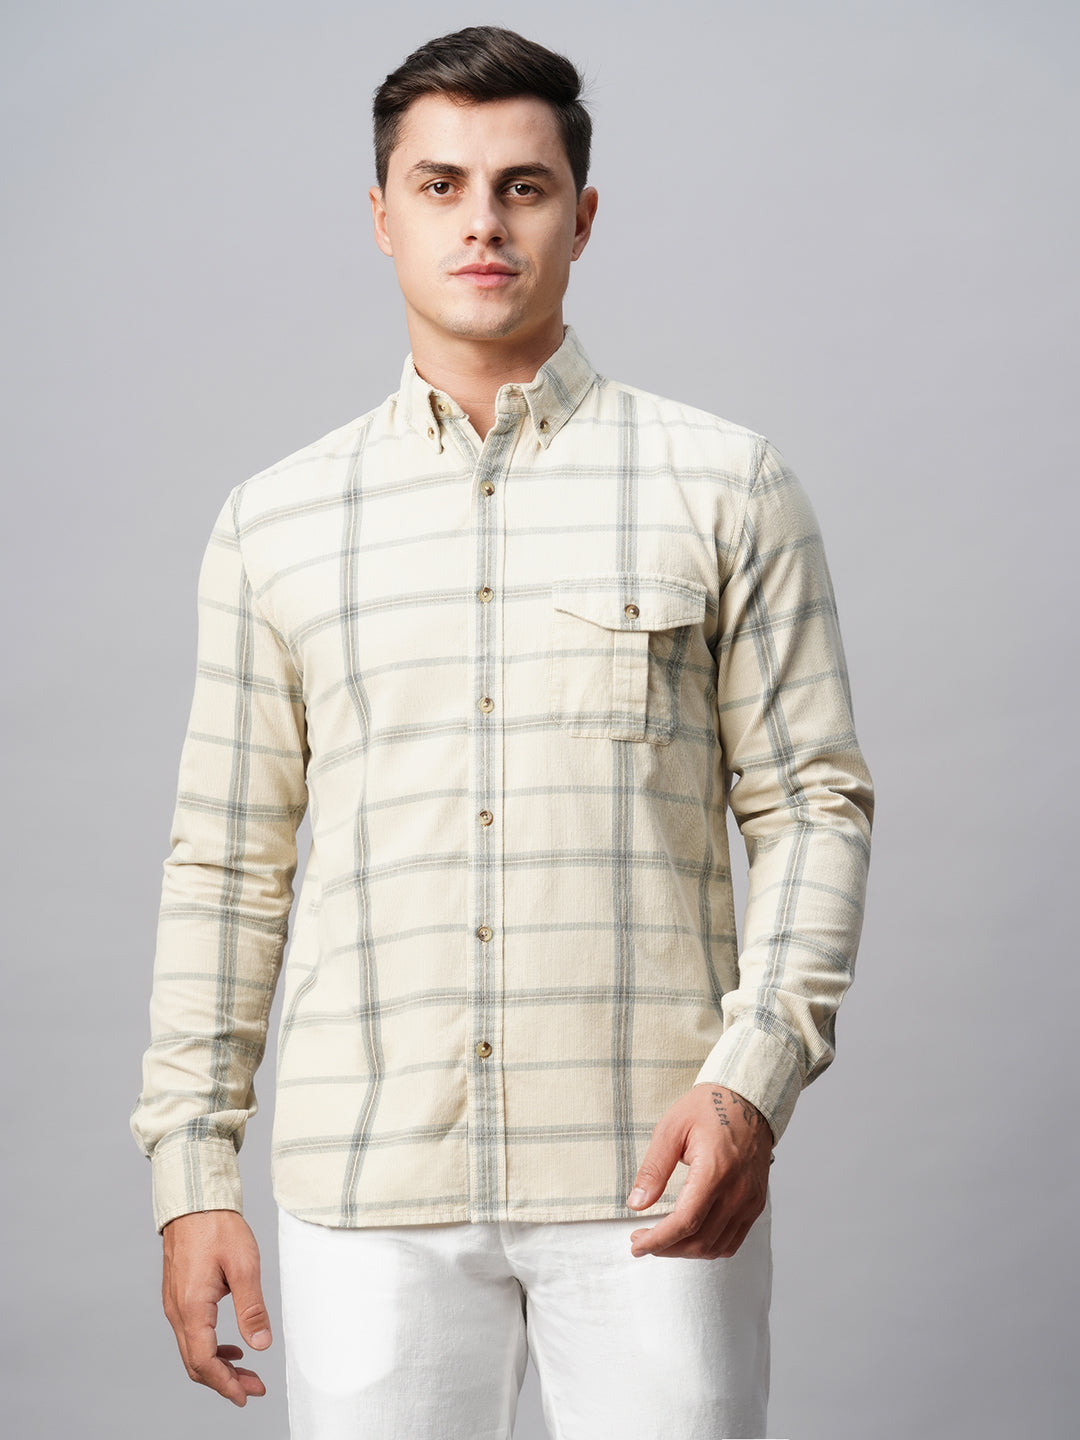 Men's Offwhite Cotton Regular Fit Checked Shirt